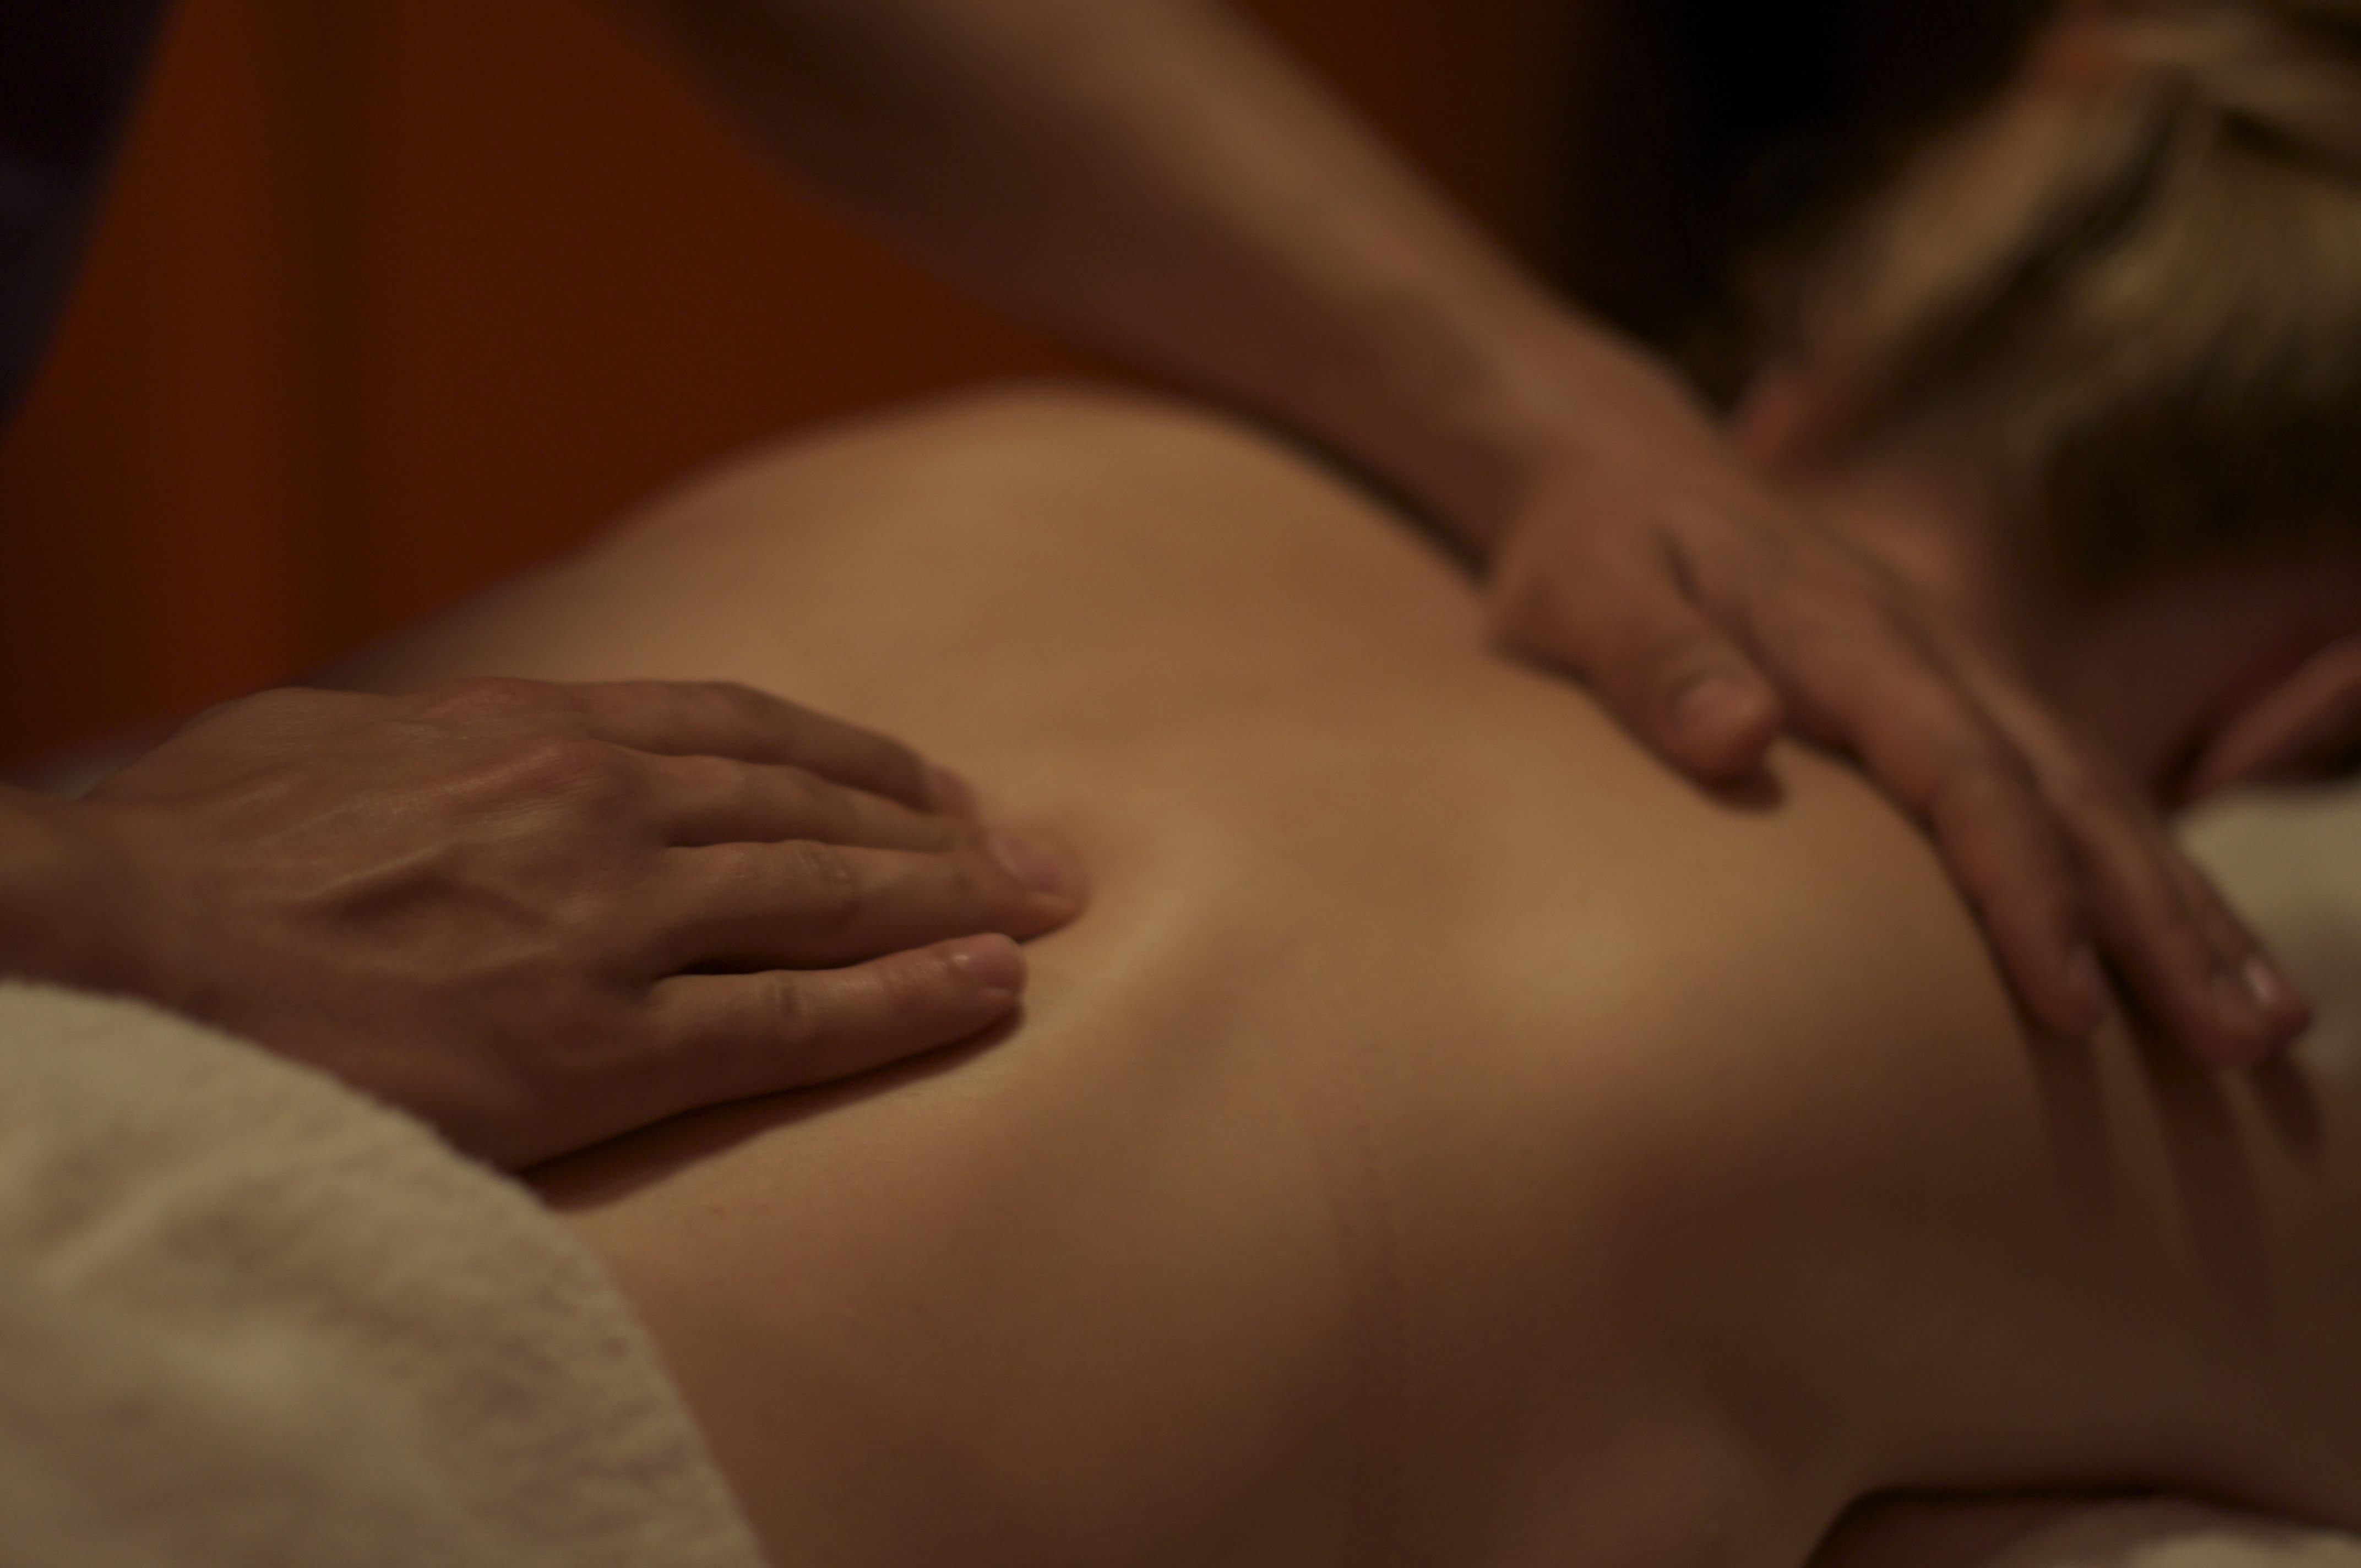 20 Reasons Why Massage Can Significantly Benefit Your Health